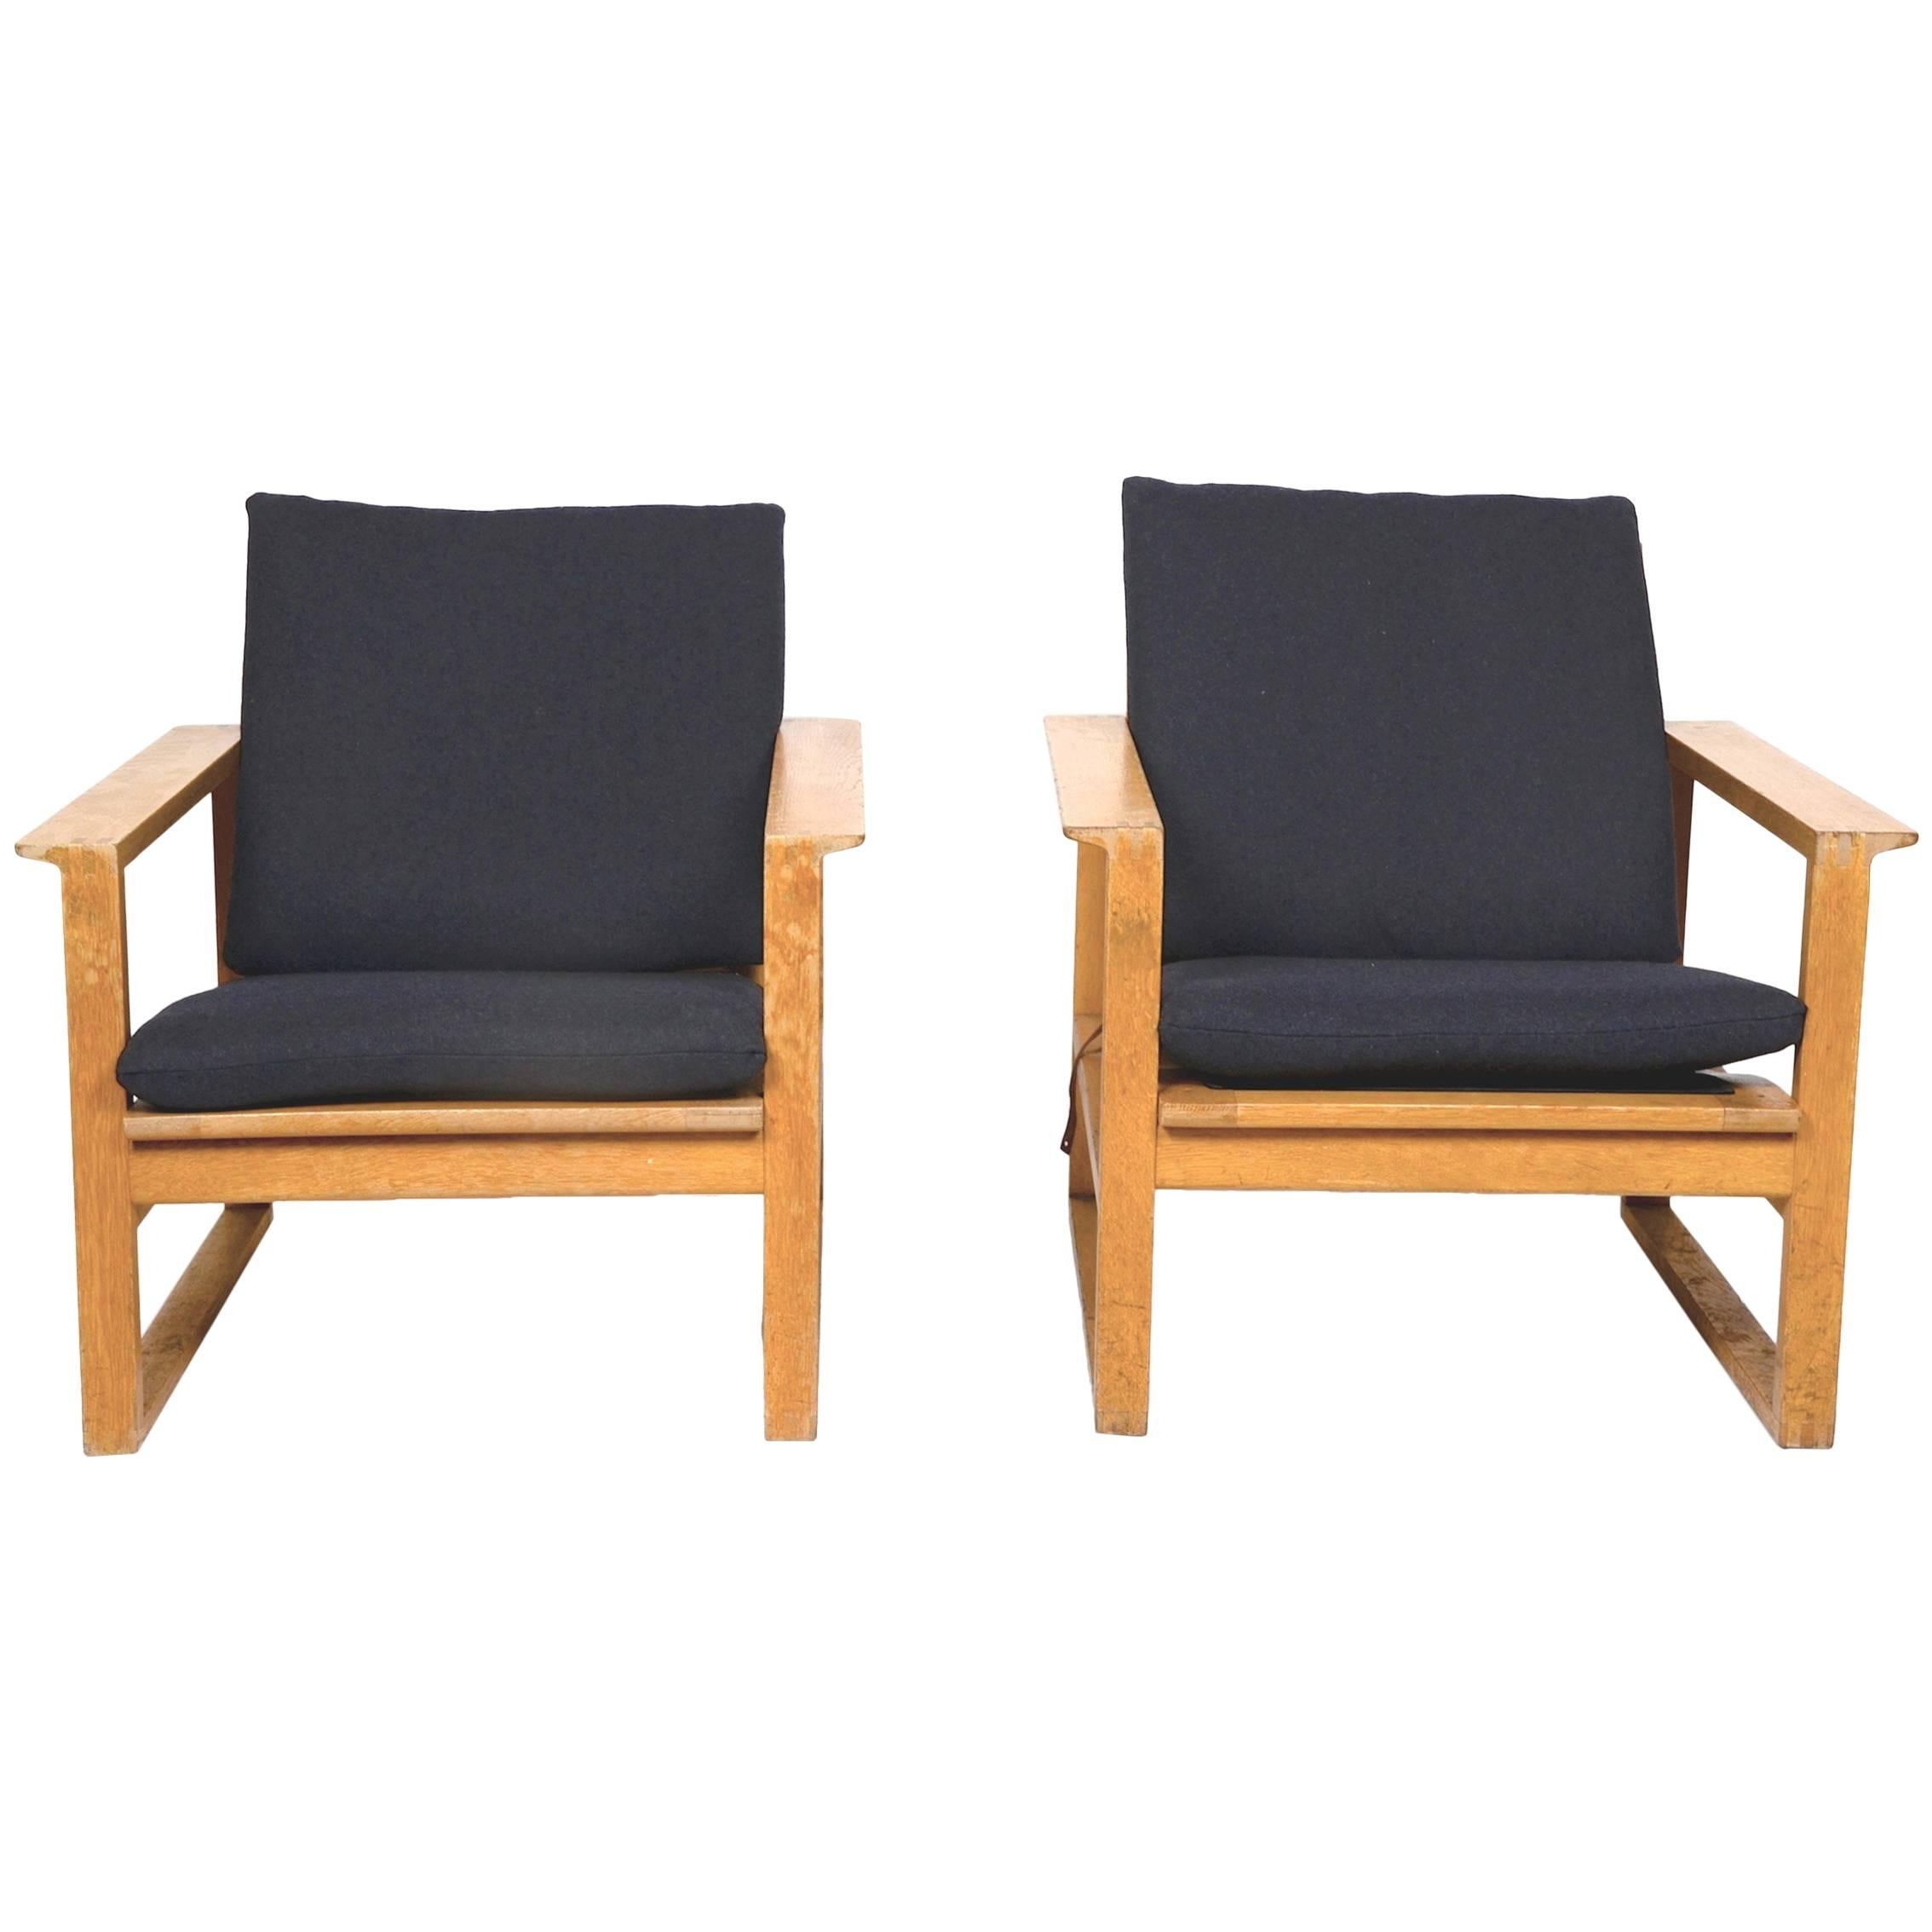 Pair of Sled Chairs / Mod. 2256 by Børge Mogensen, Fredericia